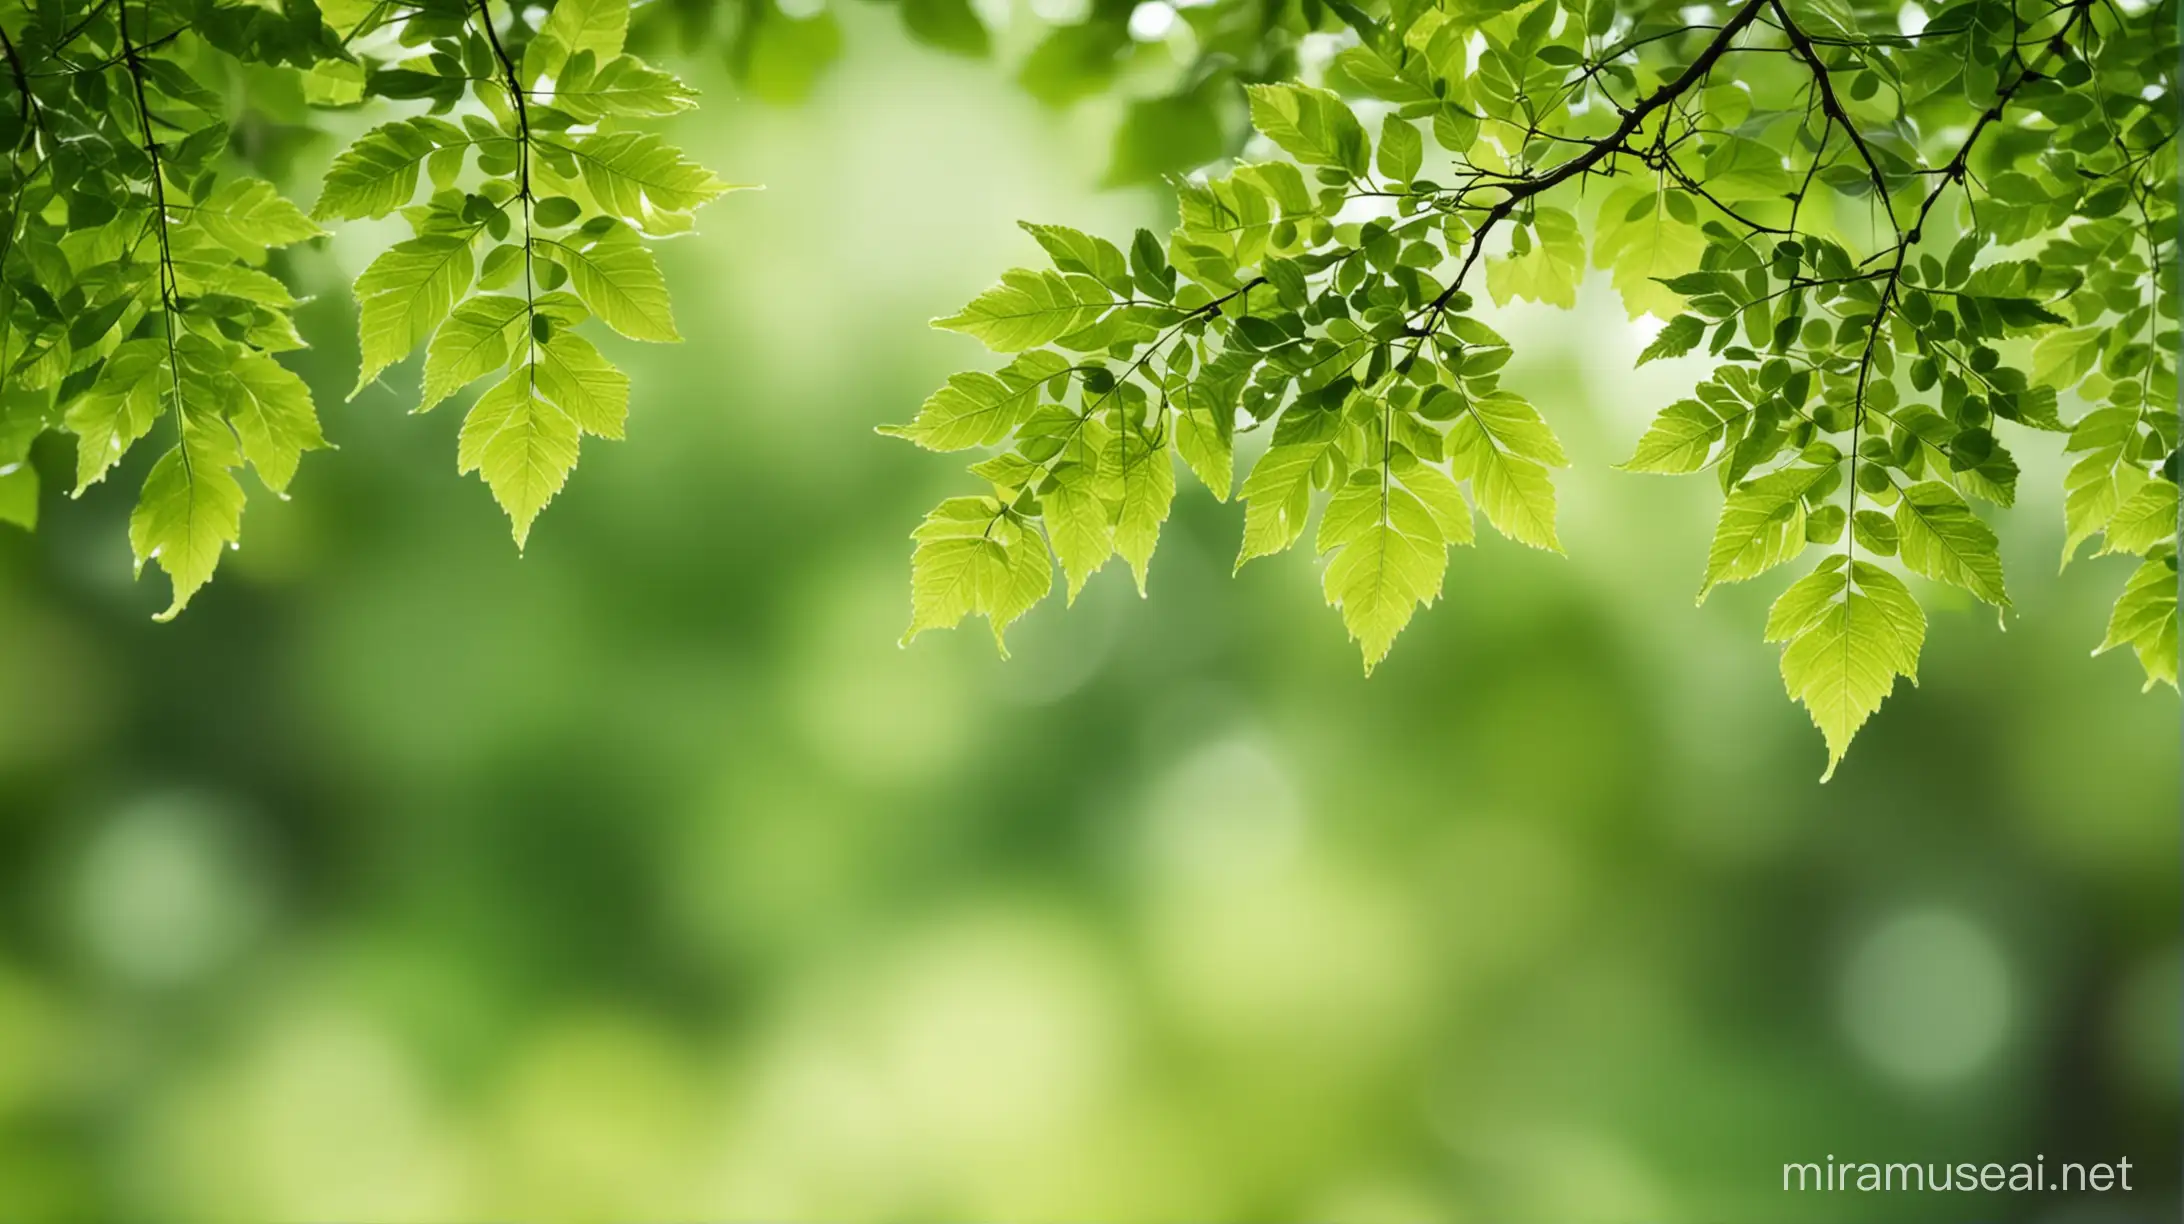 green background bokeh, leaves,slightly blurred nature in the background,greenery